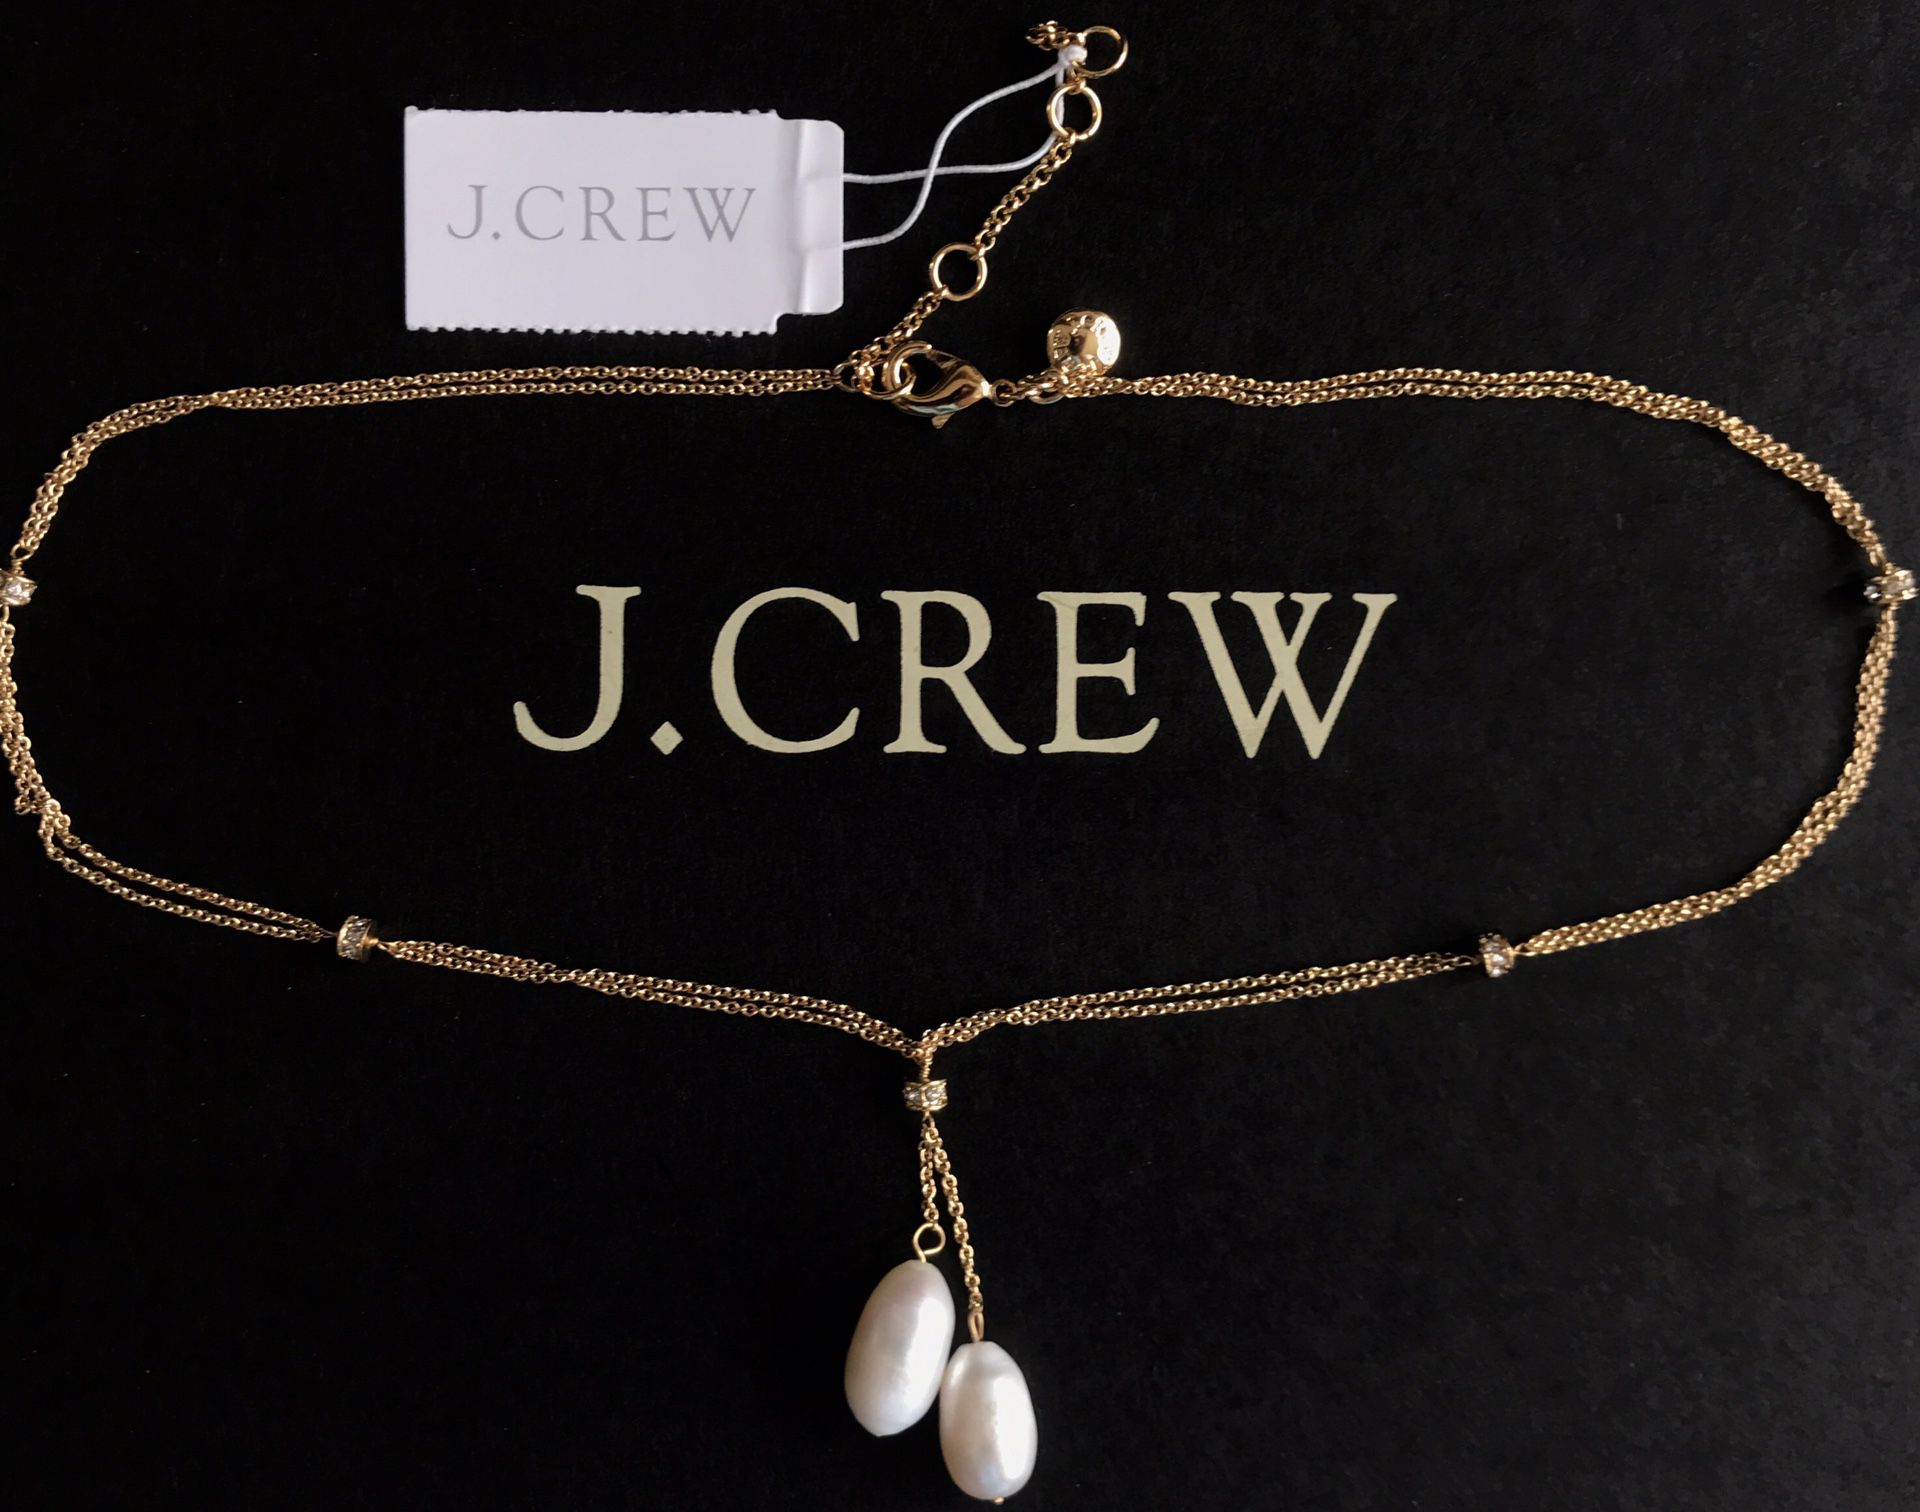 (NEW) (1 AVAILABLE) WOMEN’S J.CREW FRESHWATER PEARL PENDANT NECKLACE - SIZE: OS (ONE SIZE)